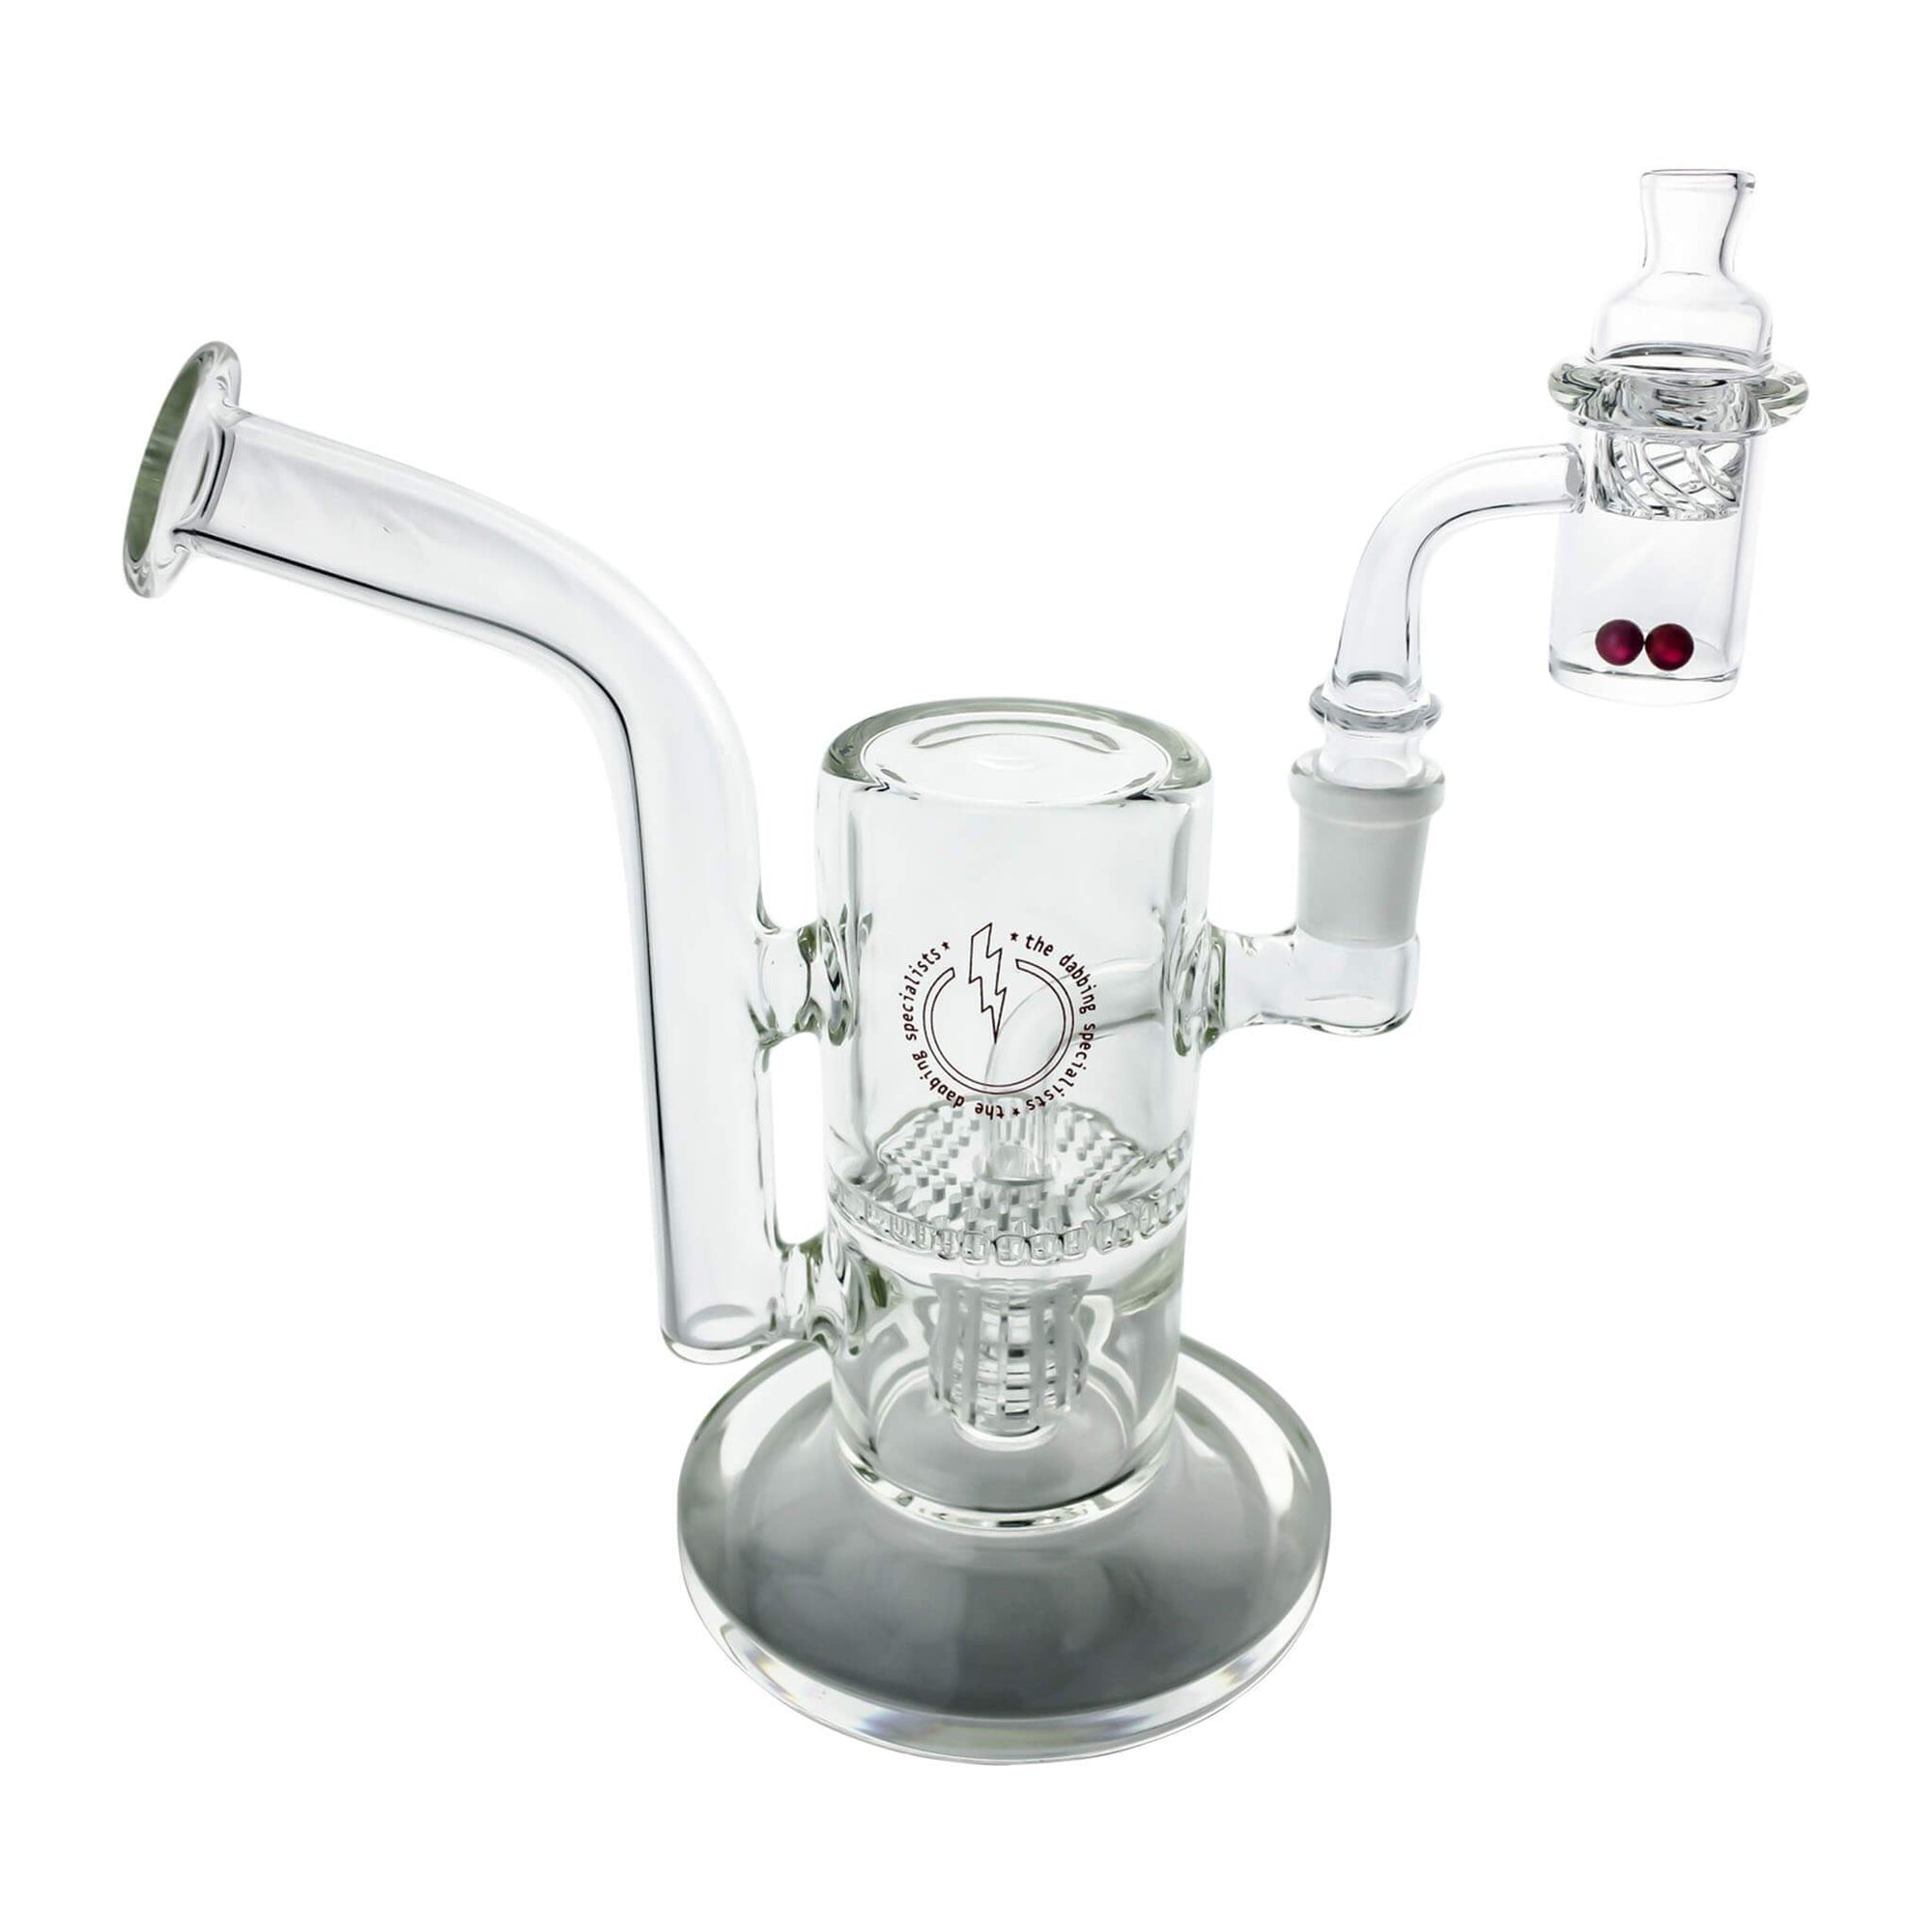 Reborn Precision Bubbler 25mm Handmade Joint Complete Dabbing Kit #1 | Complete Kit View | DW